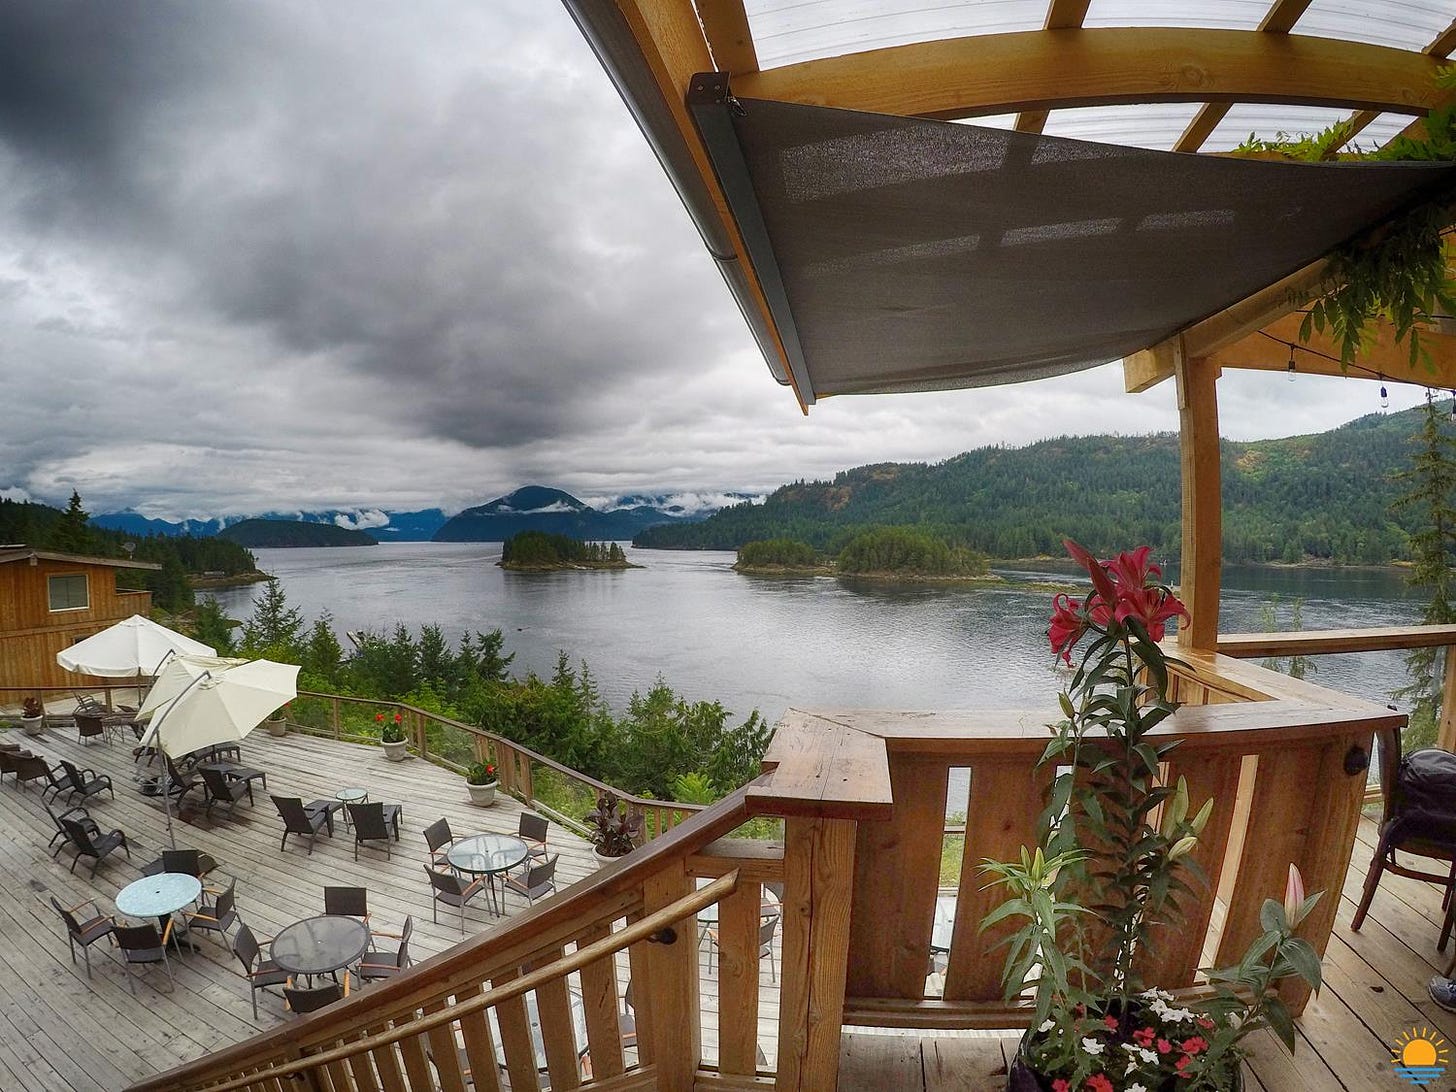 Even on an overcast day, the view from the deck at West Coast Wilderness Lodge is incredible.